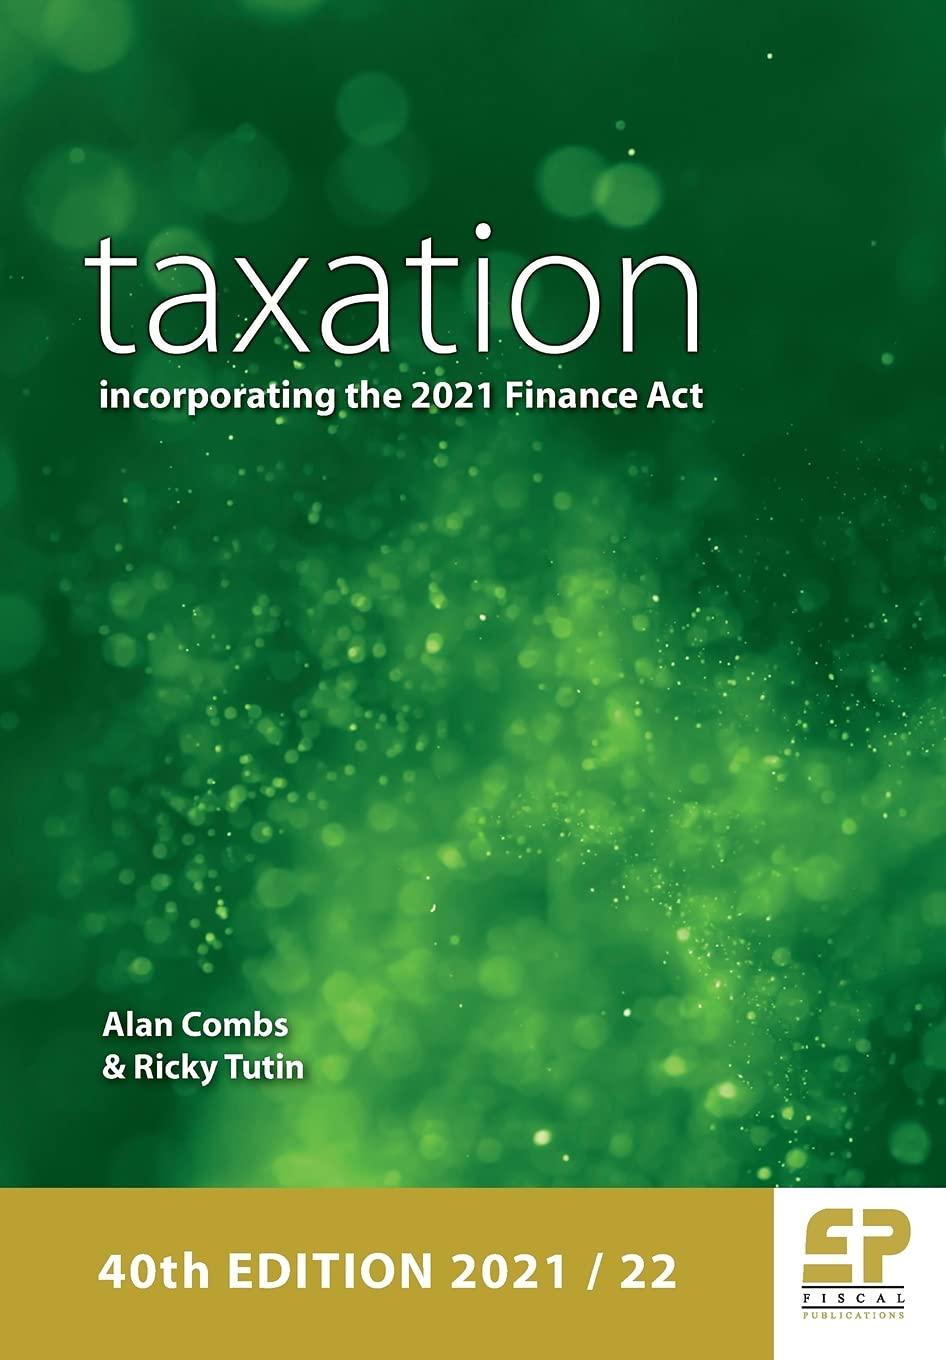 taxation incorporating the 2021 finance act 40th edition alan combs, ricky tutin 1906201617, 9781906201616